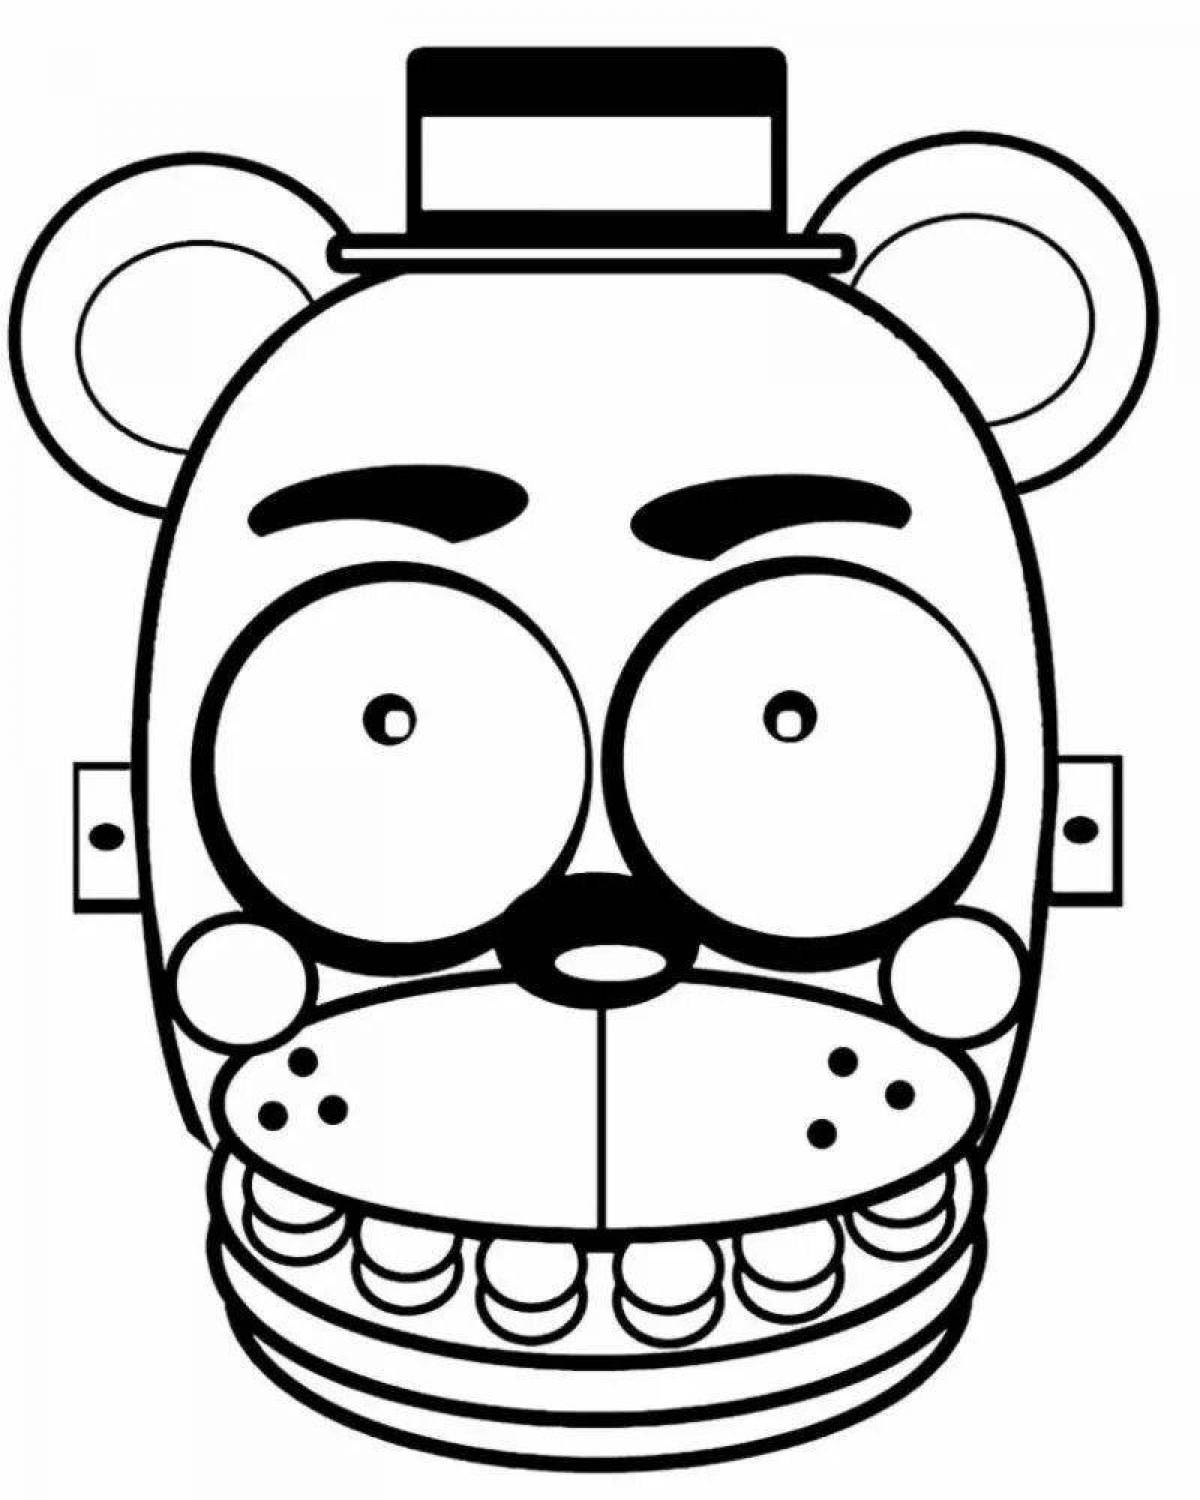 Charming bonnie mask coloring book